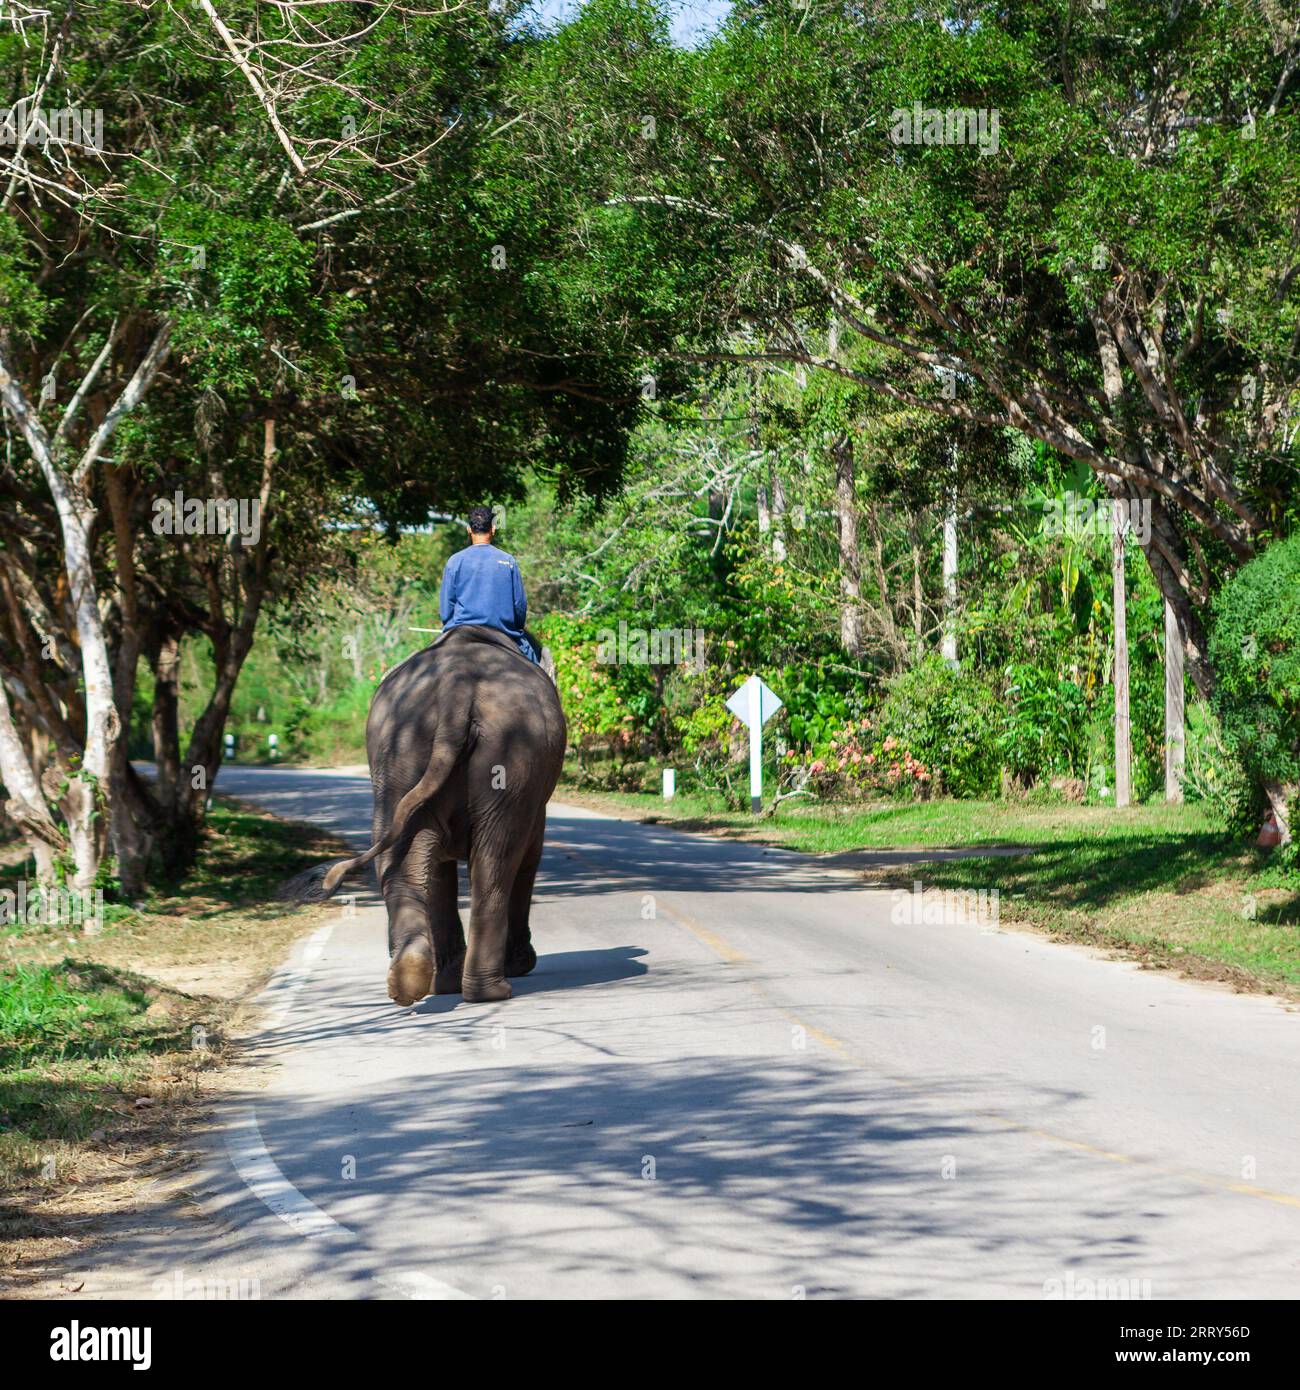 Lampang, Thailand - Jan 8, 2023: Rear view of man riding elephant on the road at Elephant Conservation Center in Northern Thailand. Stock Photo